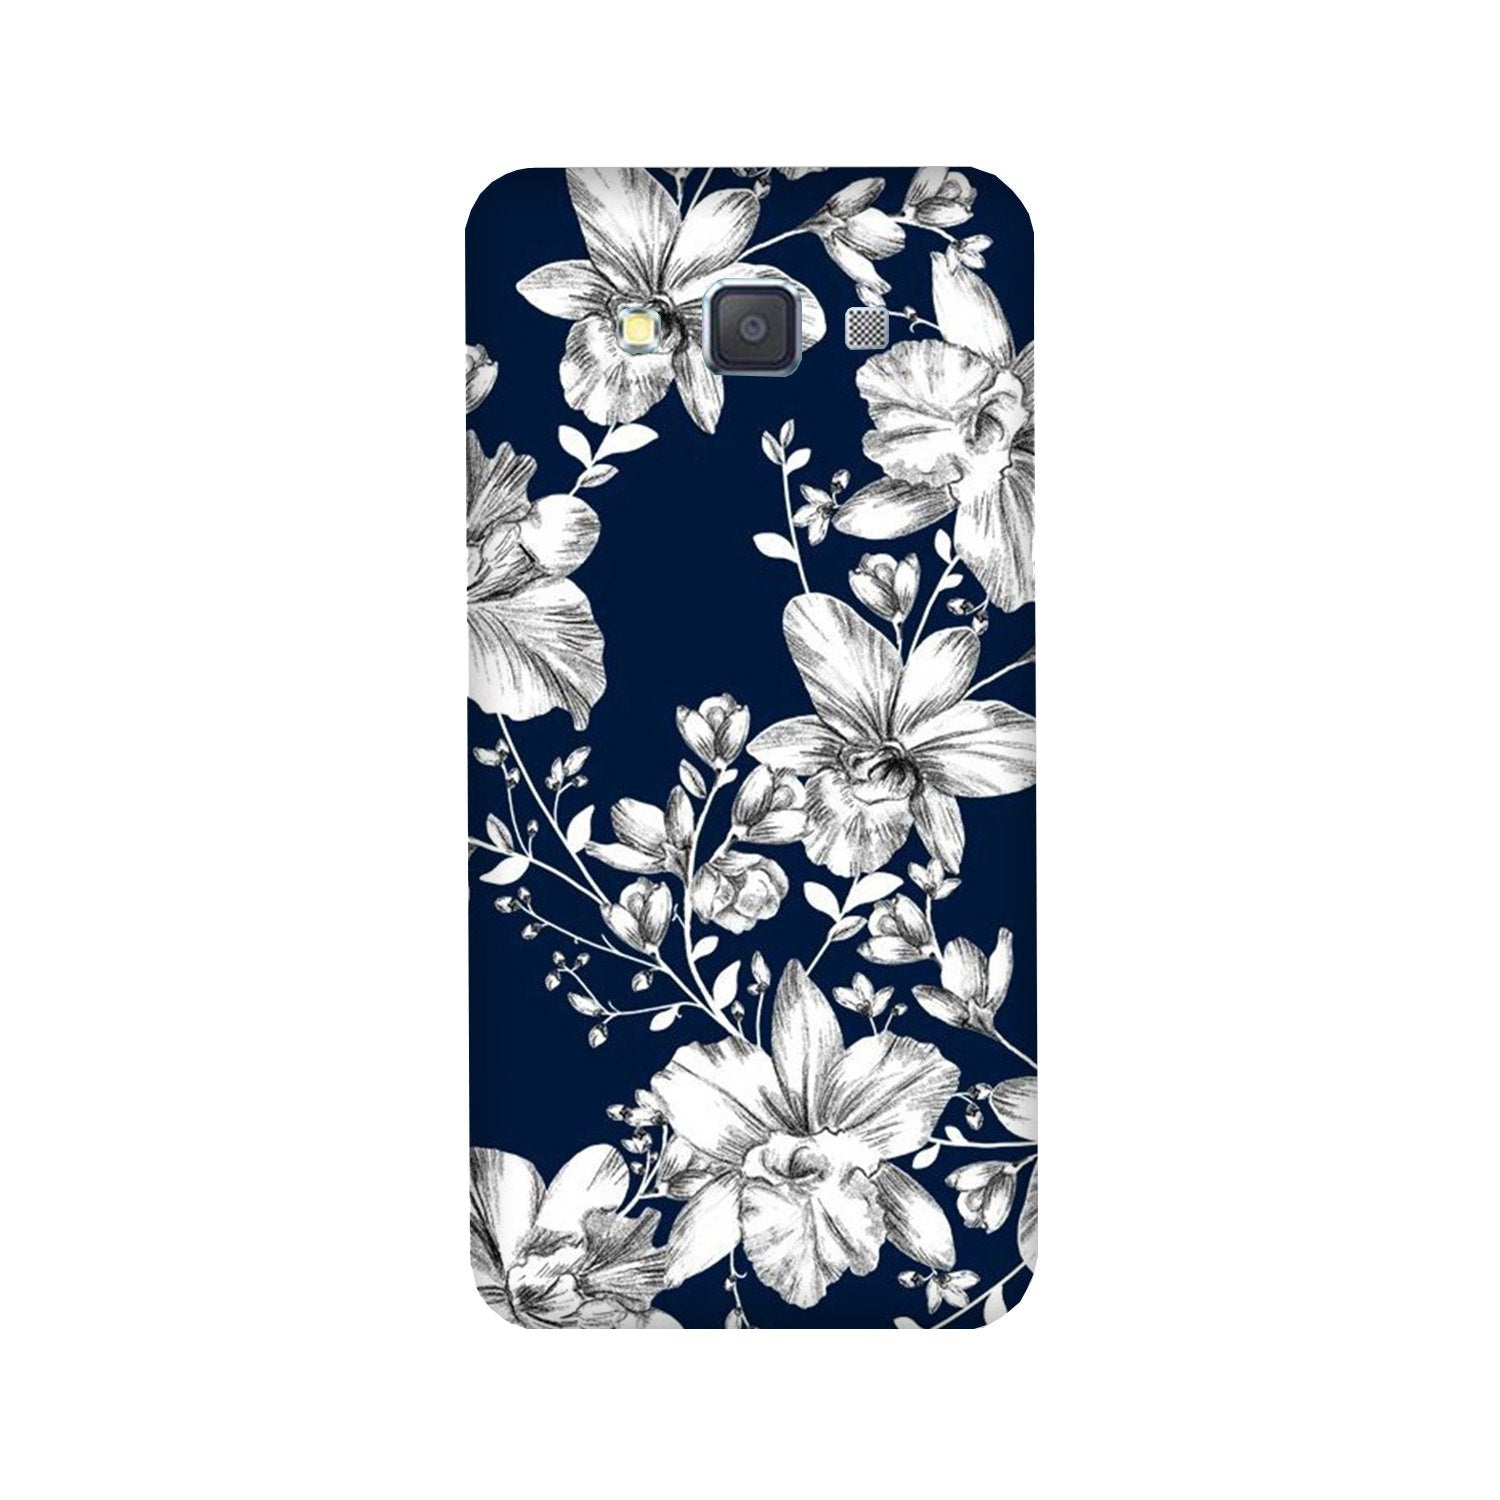 White flowers Blue Background Case for Galaxy Grand Prime